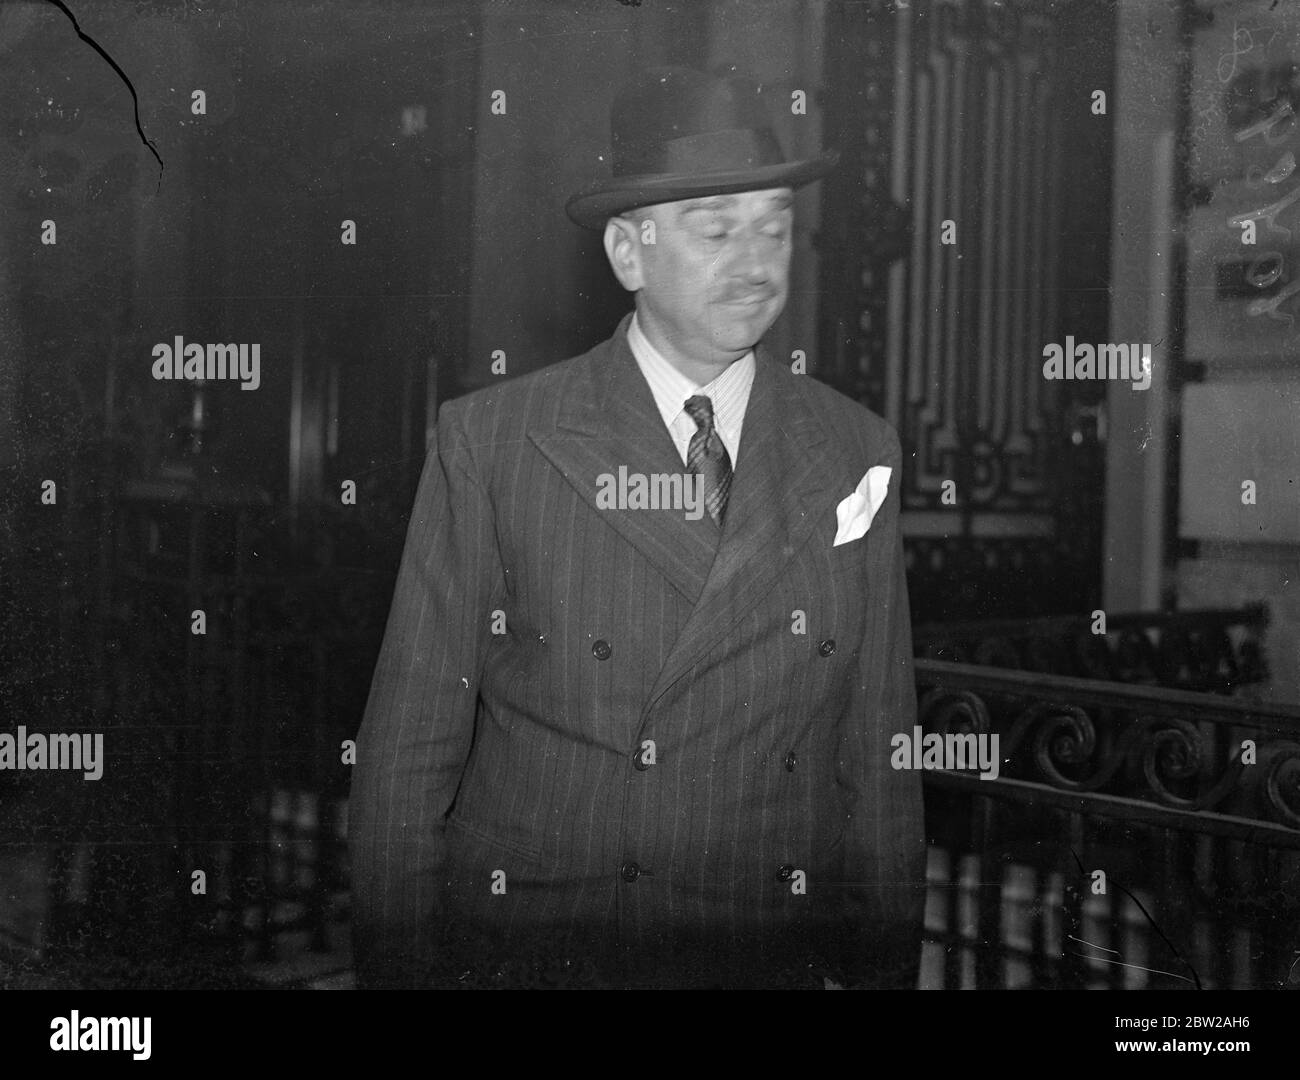 Harley Street surgeon goes to court for resumed hearing of action for alleged negligence. Dr Horace Power Winsbury White, seen here as he left his home in Harley Street today, the Harley Street surgeon, went to the law courts for the resumed hearing of the action in which he is sued for alleged negligence in performing an operation. The plaintiff is Mr Arthur William Morris, a commercial traveller, aged 61, of Goodmayes, Essex, who alleges that after an operation performed on him by Mr Winsbury White a training shoe was left in his body for four months and that his health was ruined. 2 Novembe Stock Photo